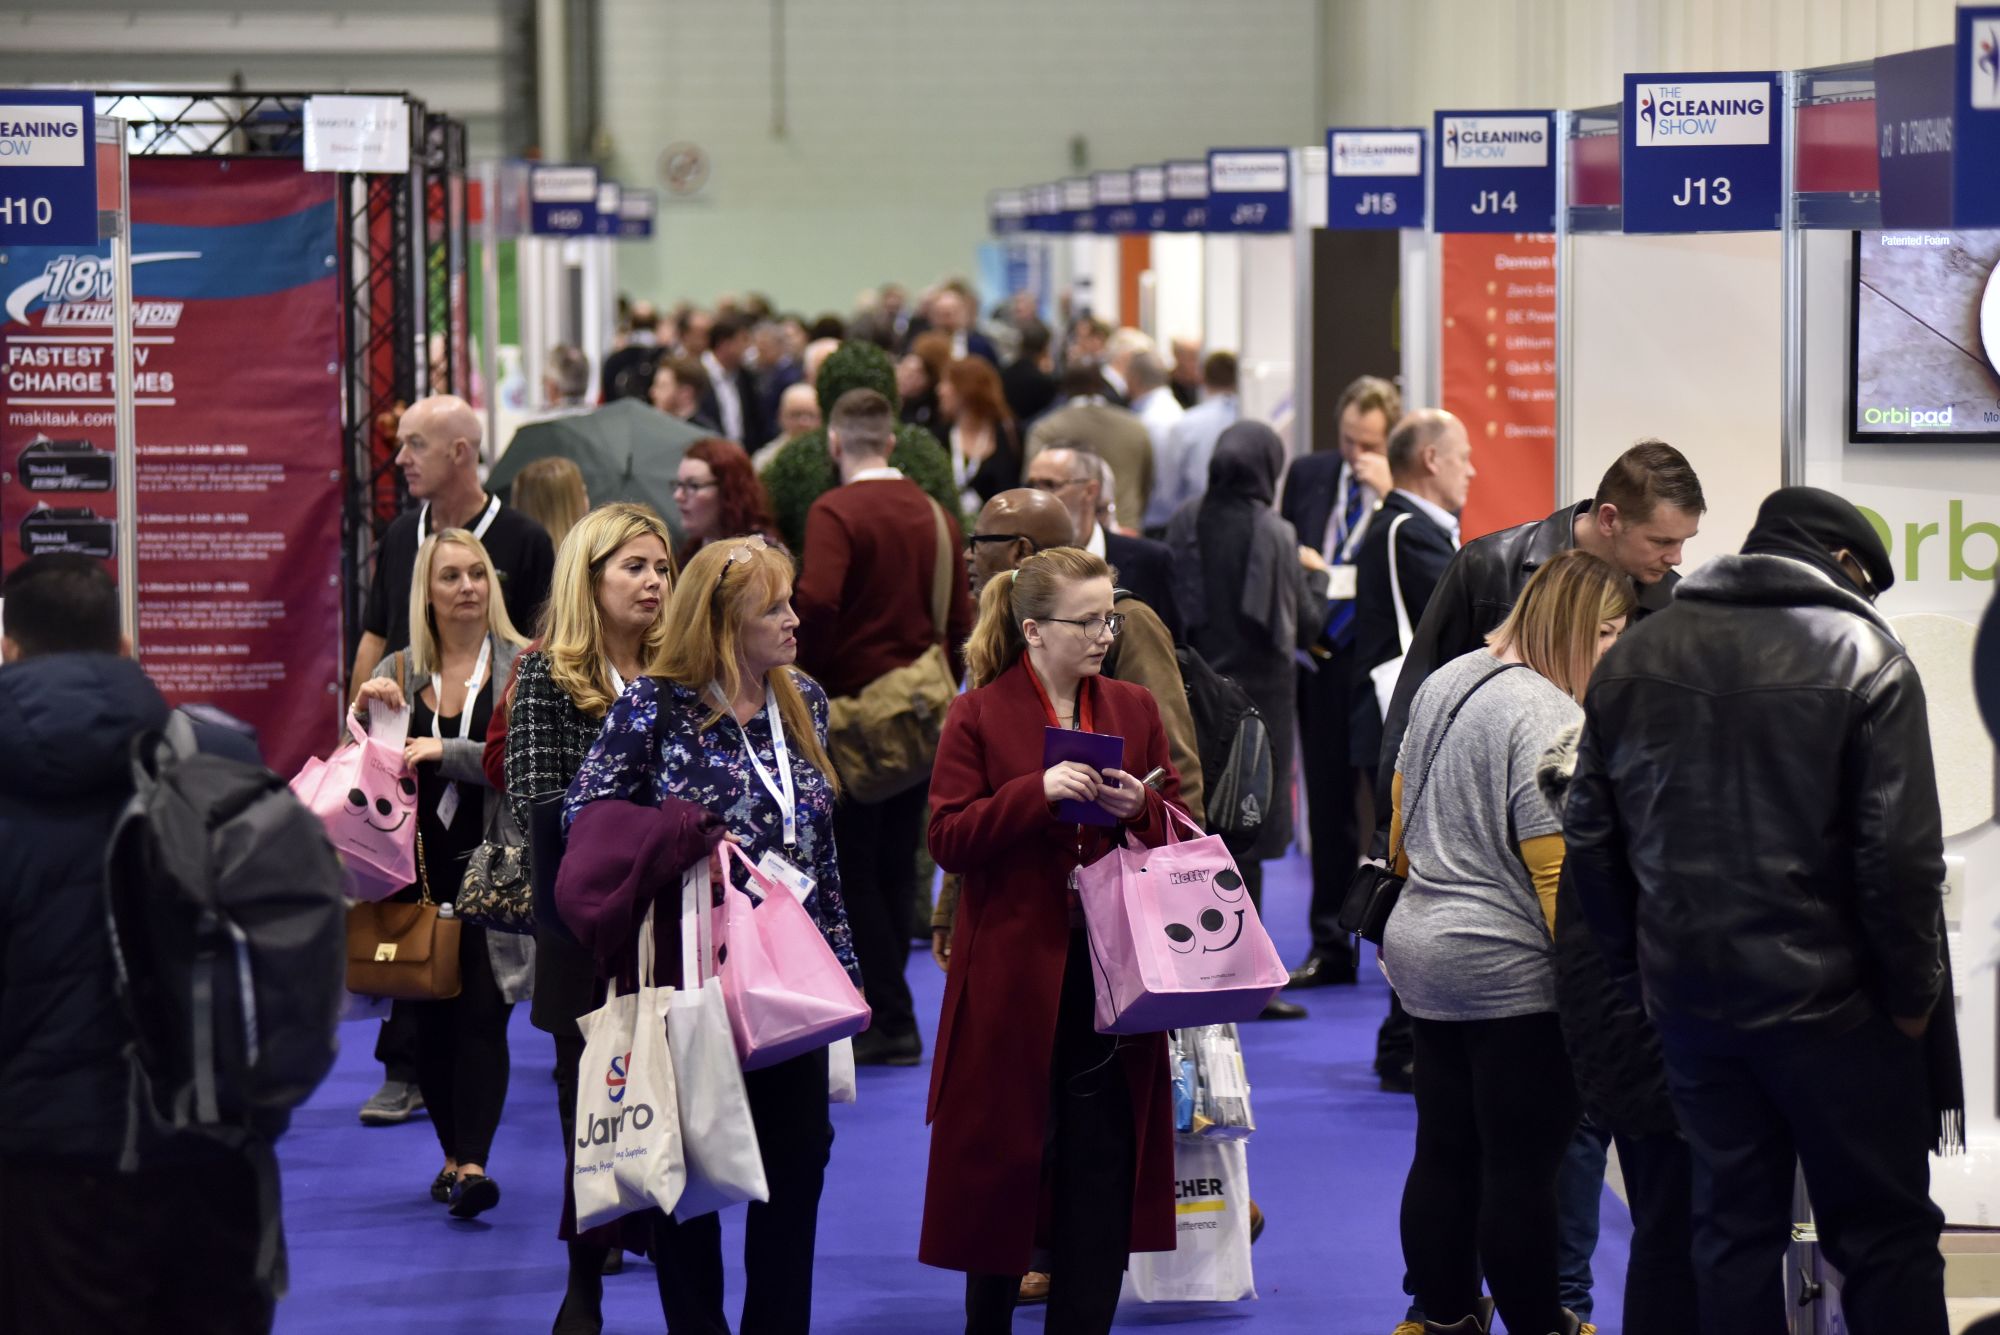 June 2021 Date Announced for Cleaning Show